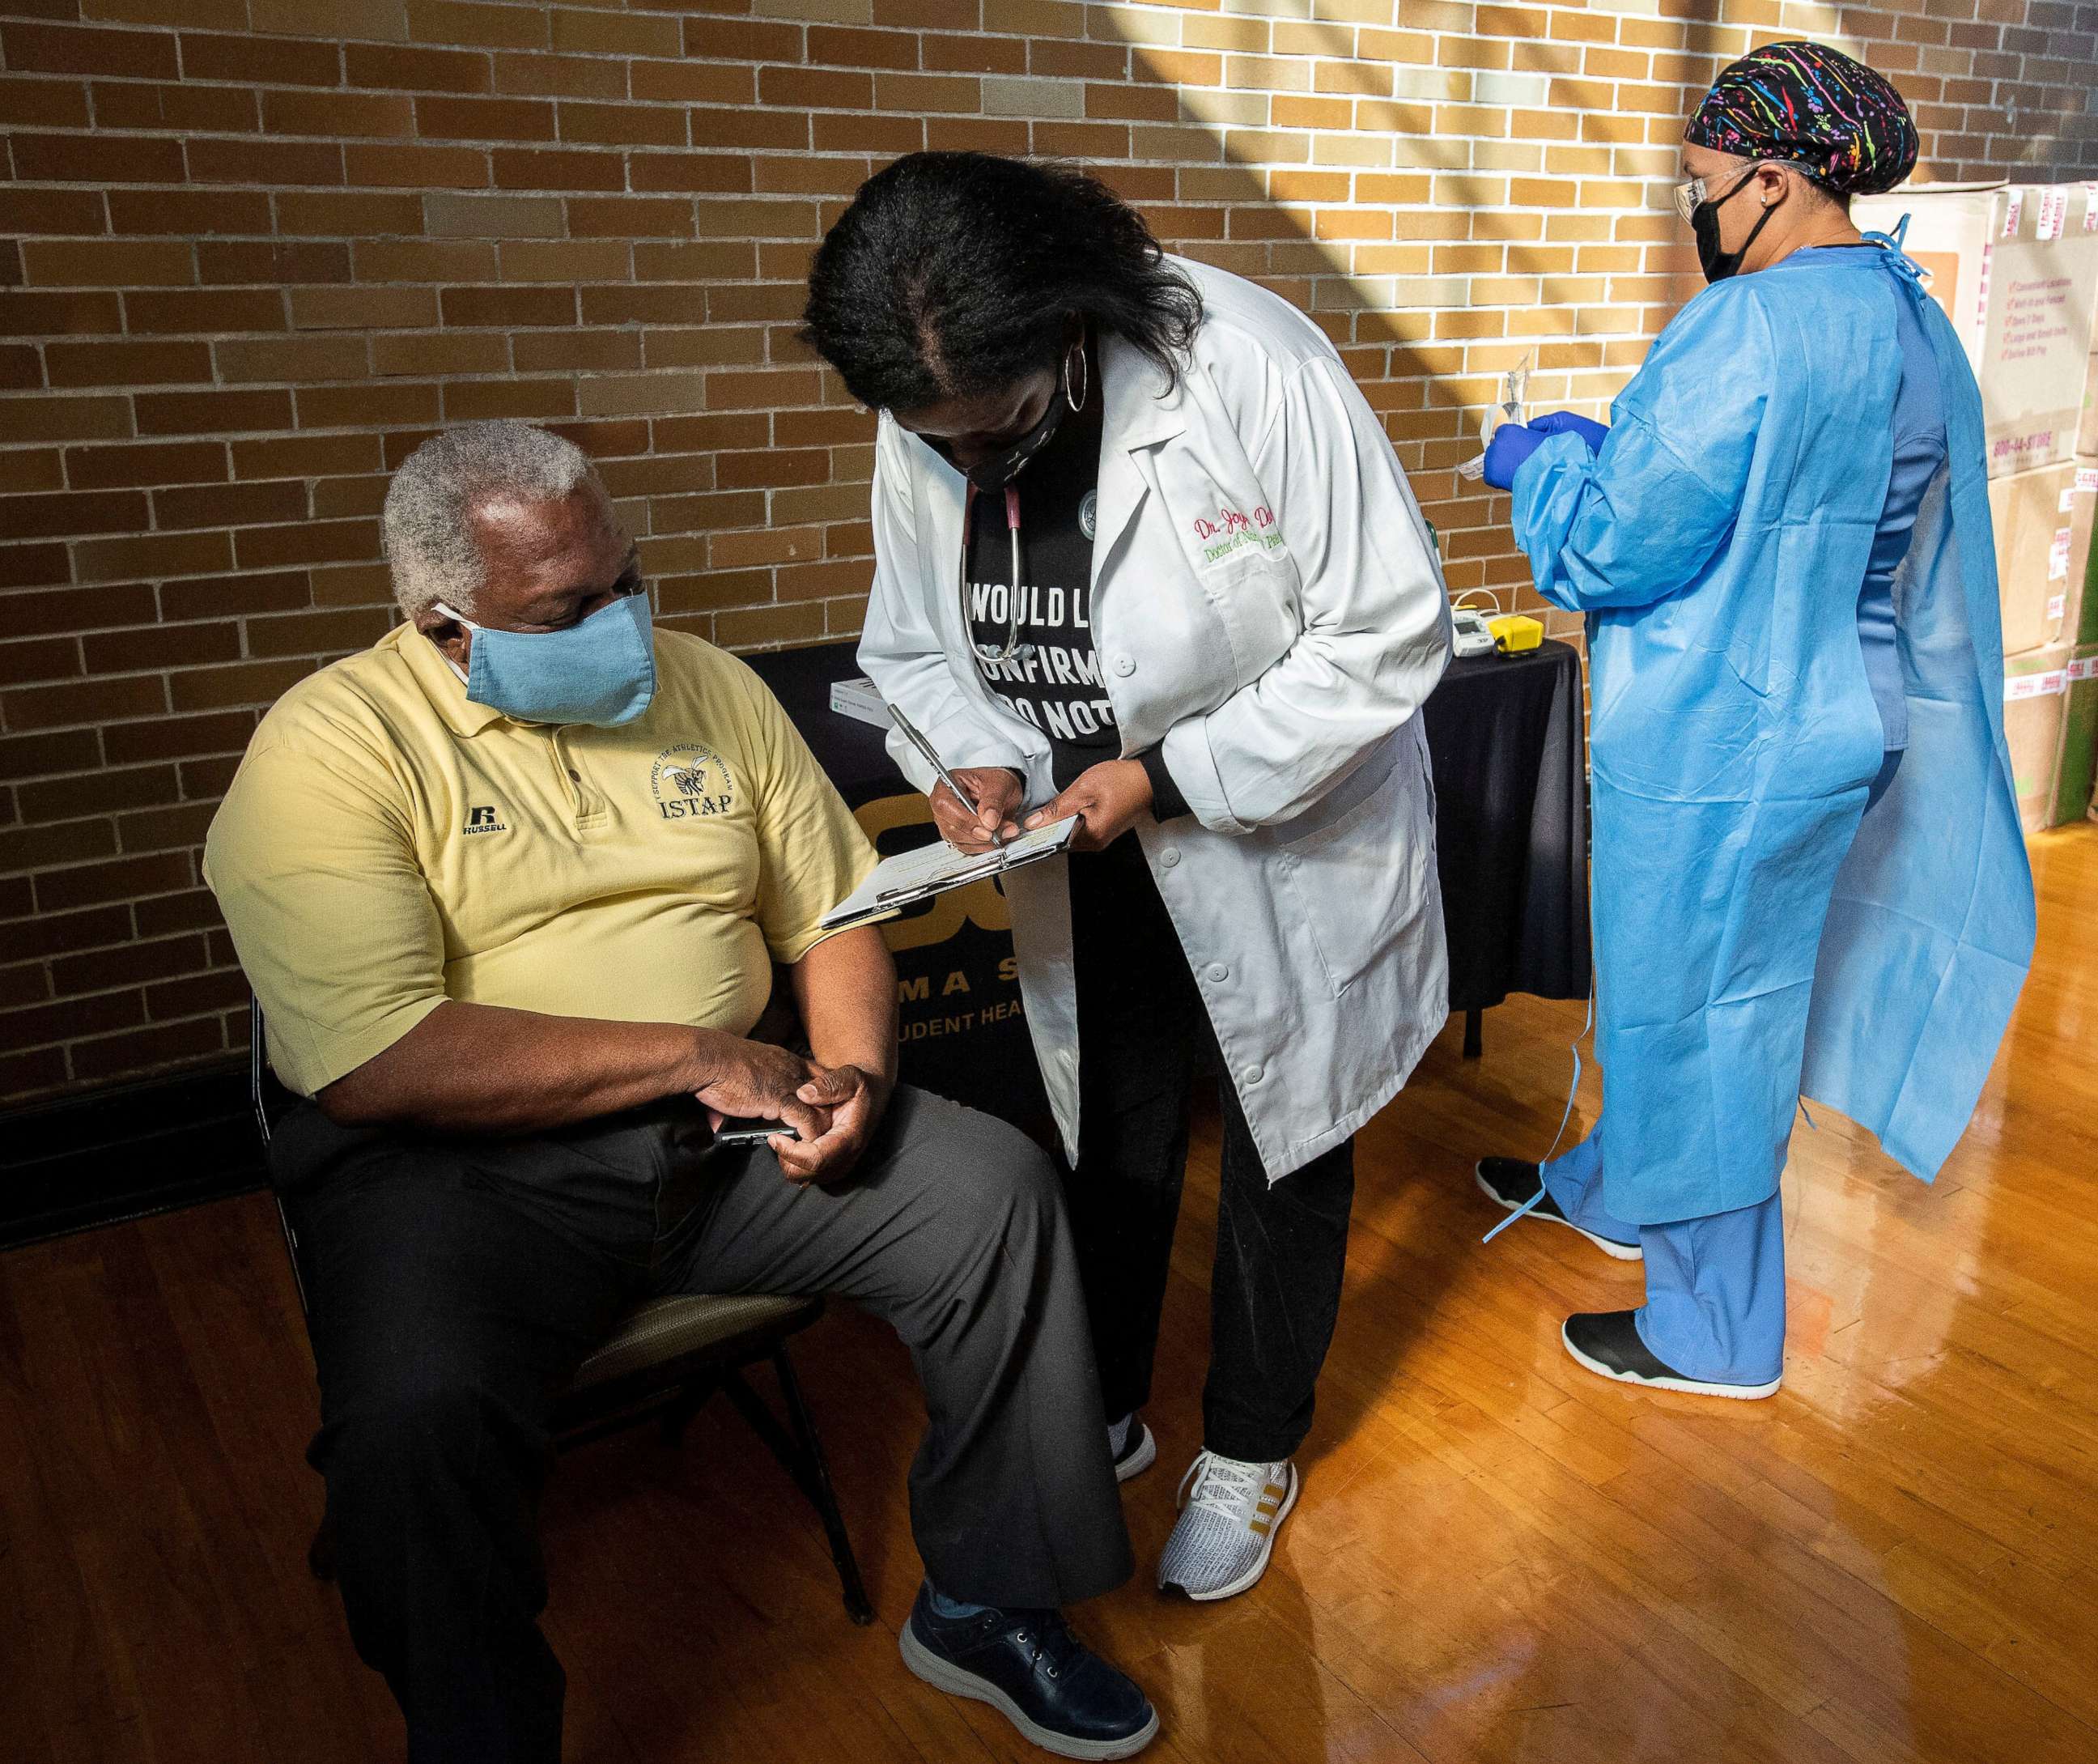 PHOTO: Judge Johnny Hardwick gets his COVID-19 vaccine as he promotes vaccine safety and awareness at the Alabama State University campus in Montgomery, Ala. on Jan. 29, 2021.